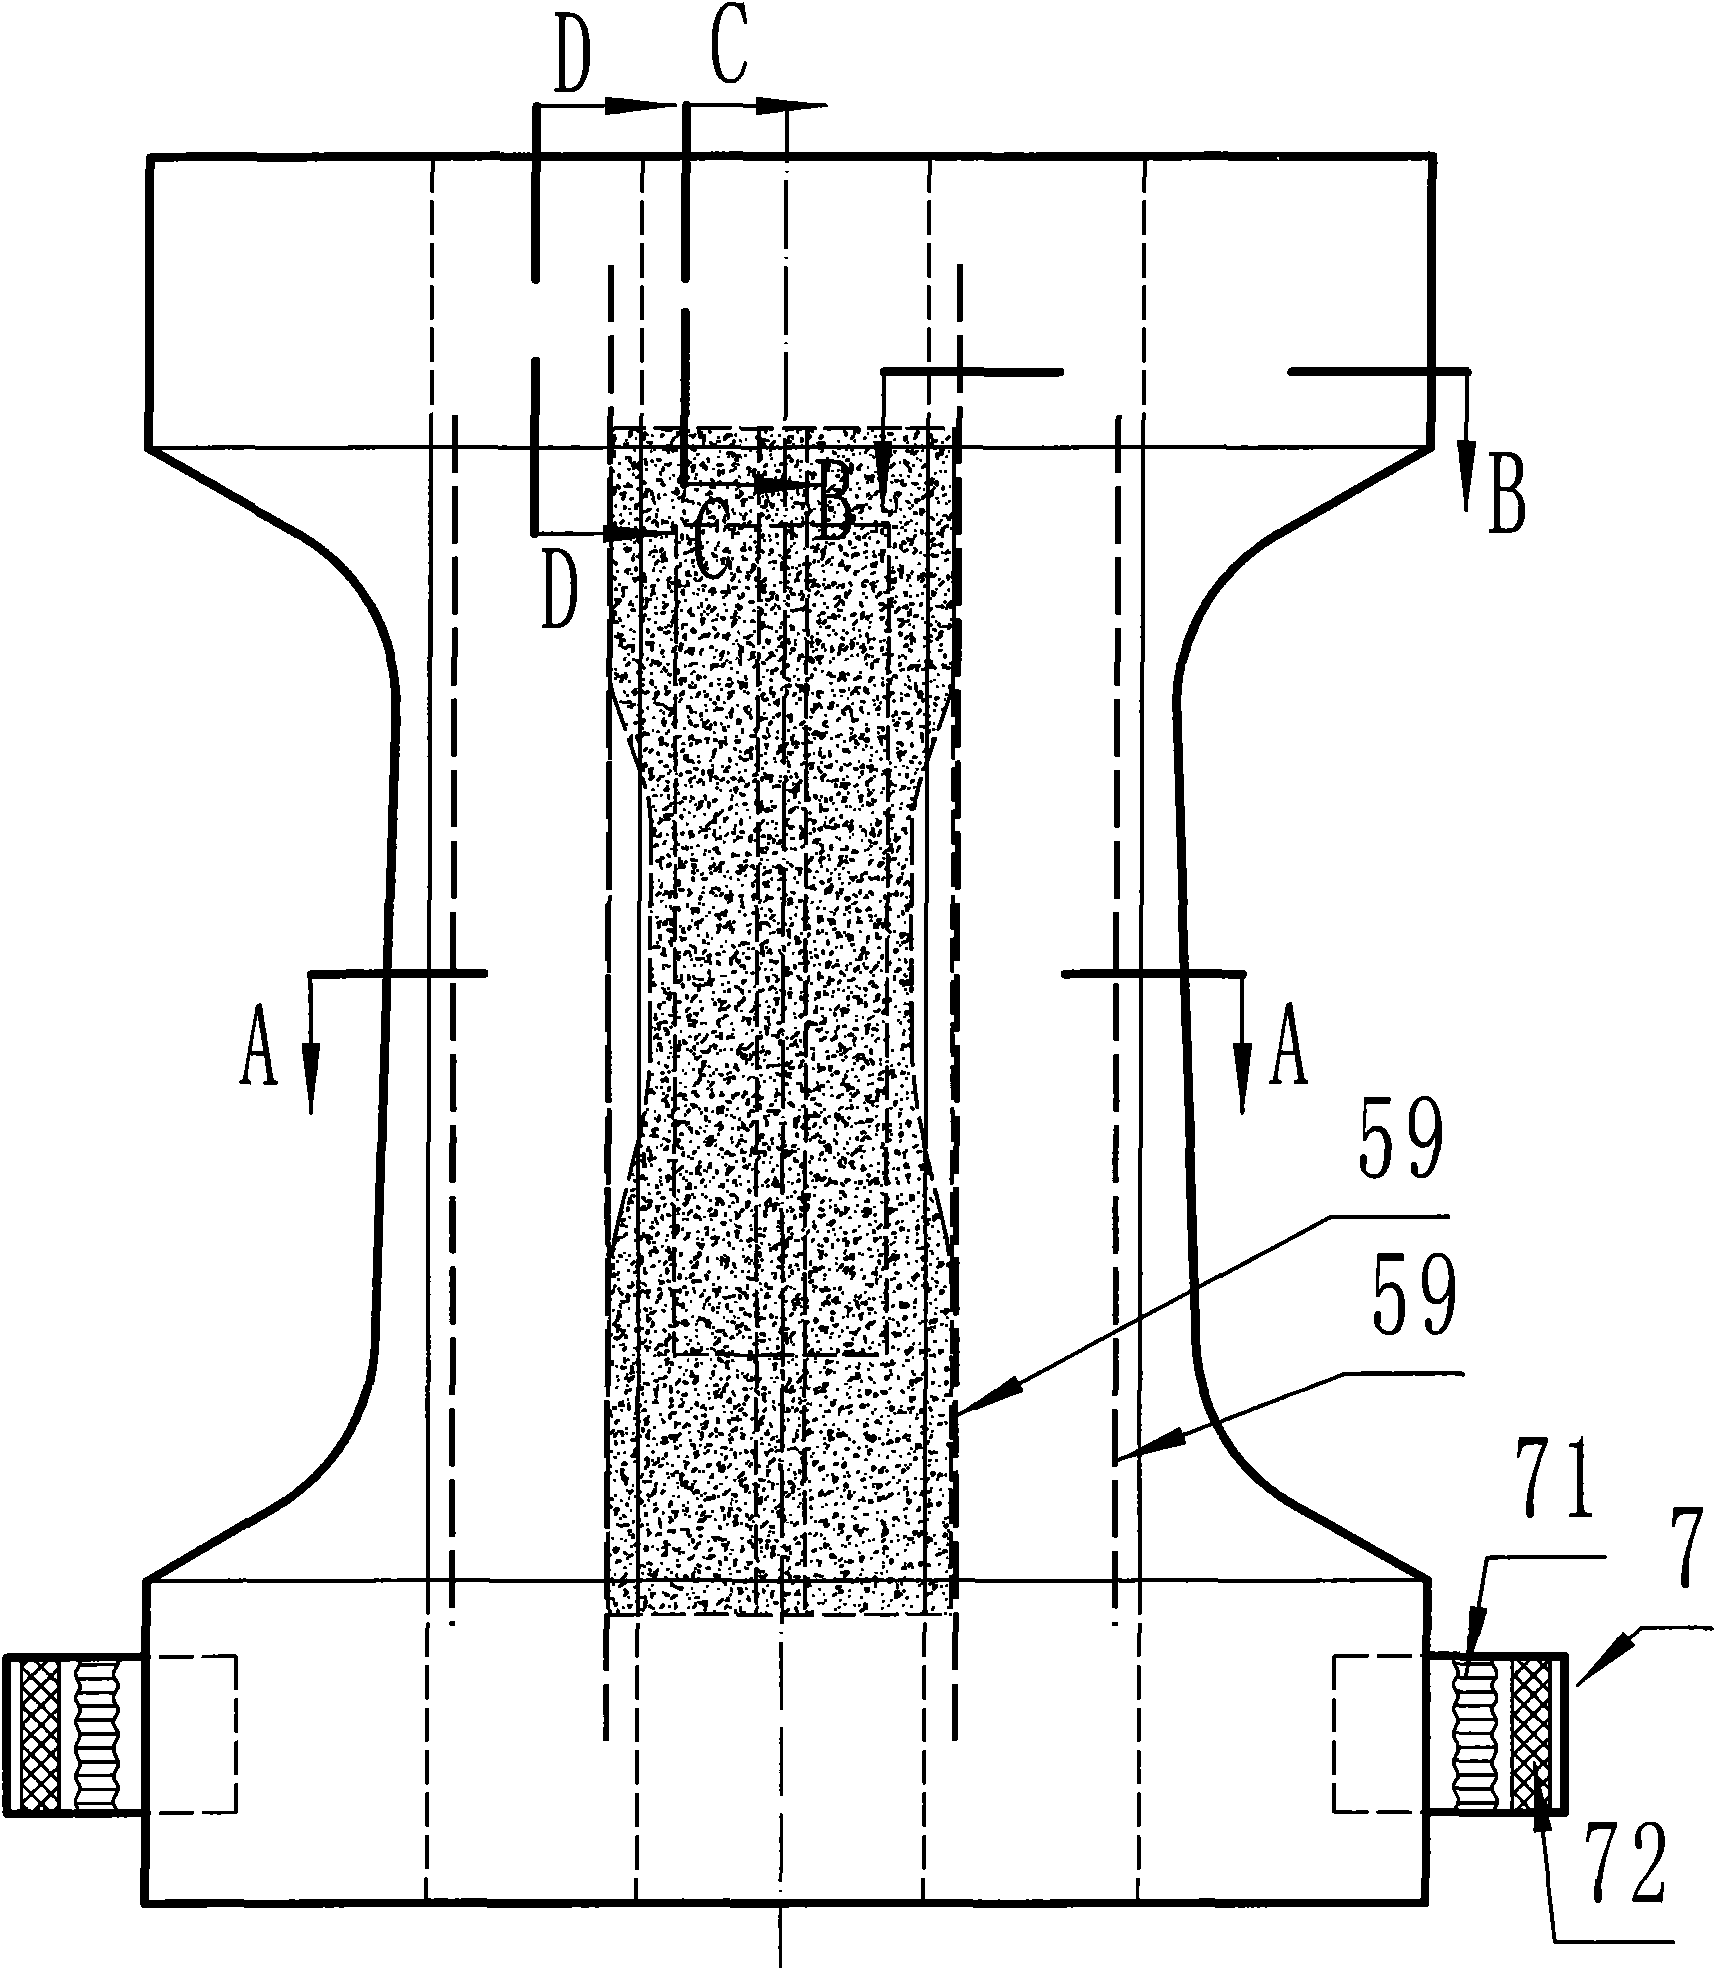 Disposable absorption product with double leakproof isolation boundary